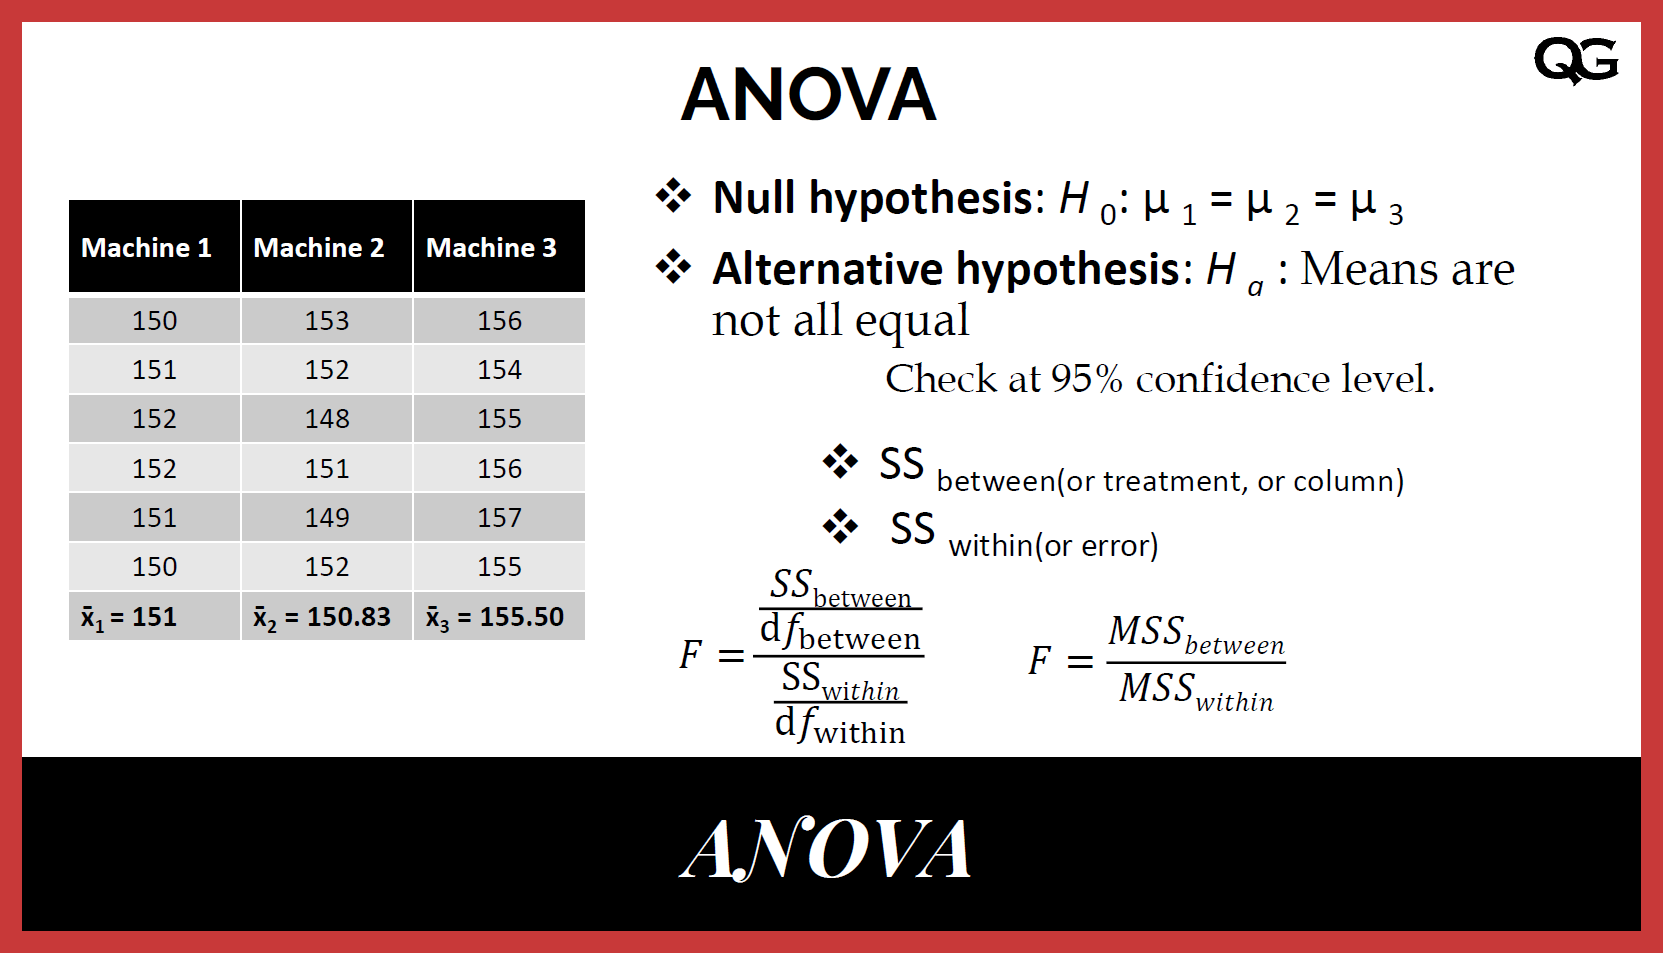 the research hypothesis for the anova test is